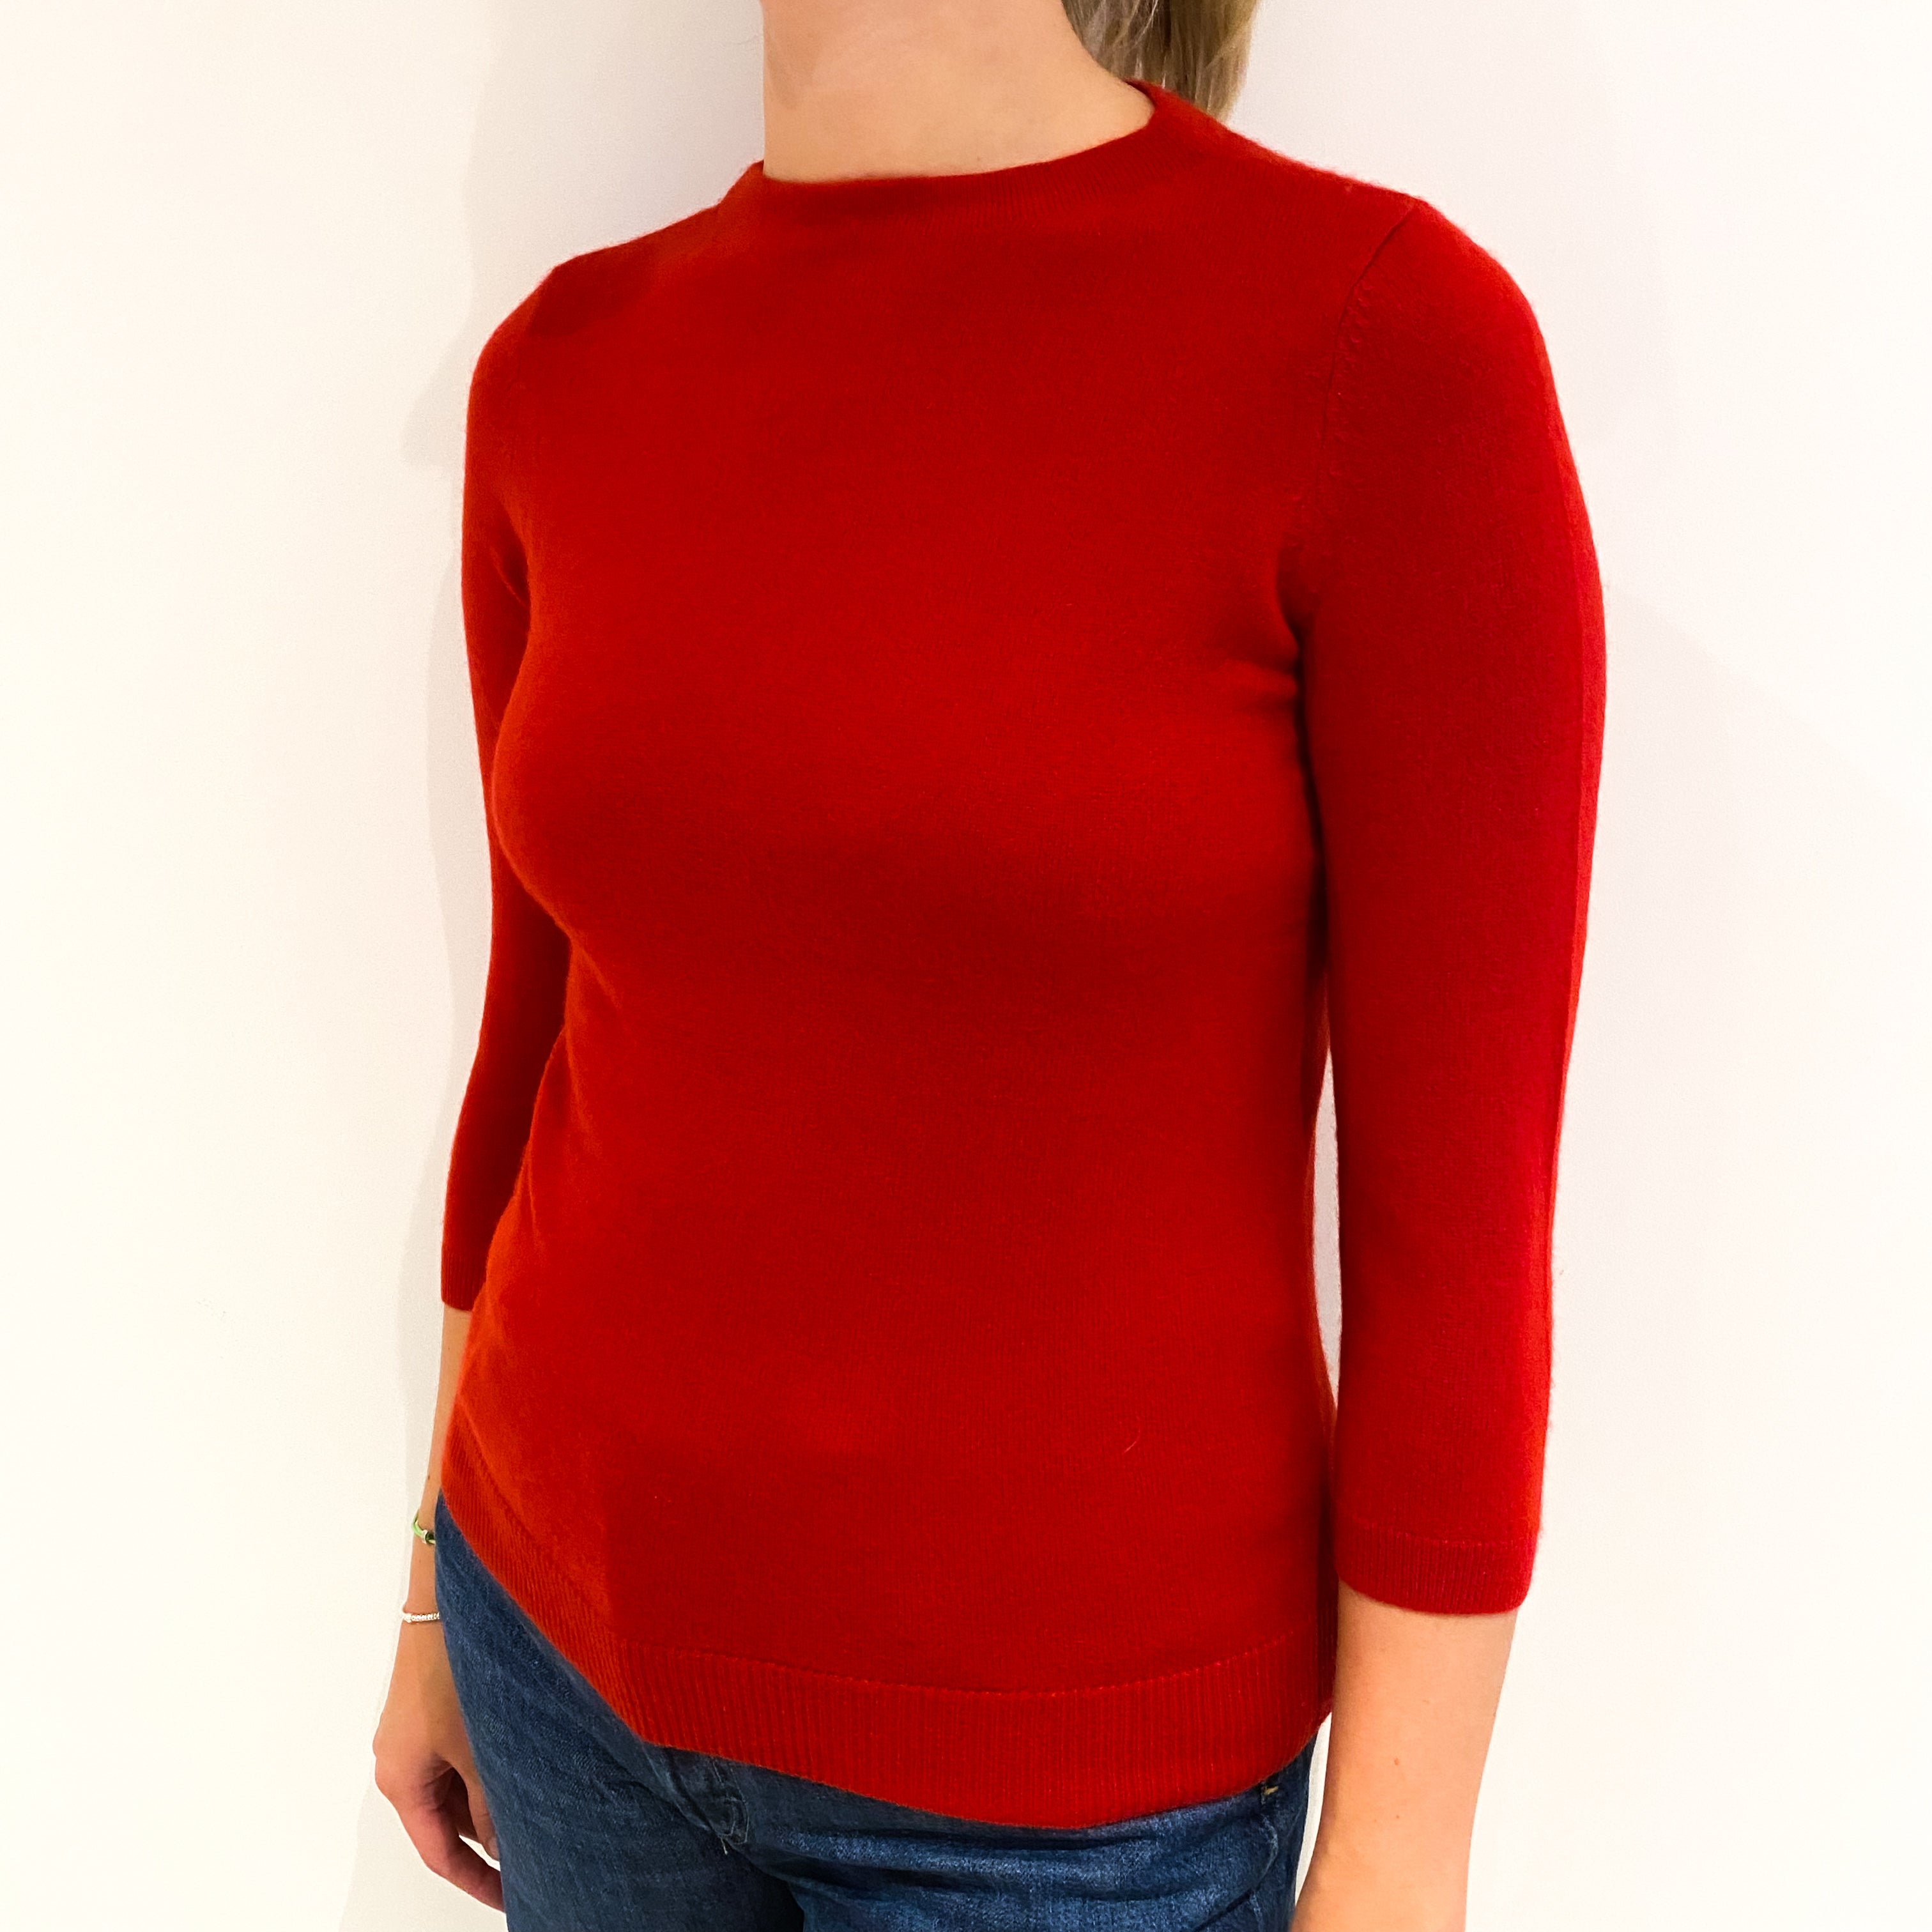 Scarlet Red 3/4 Sleeve Cashmere Crew Neck Jumper Small